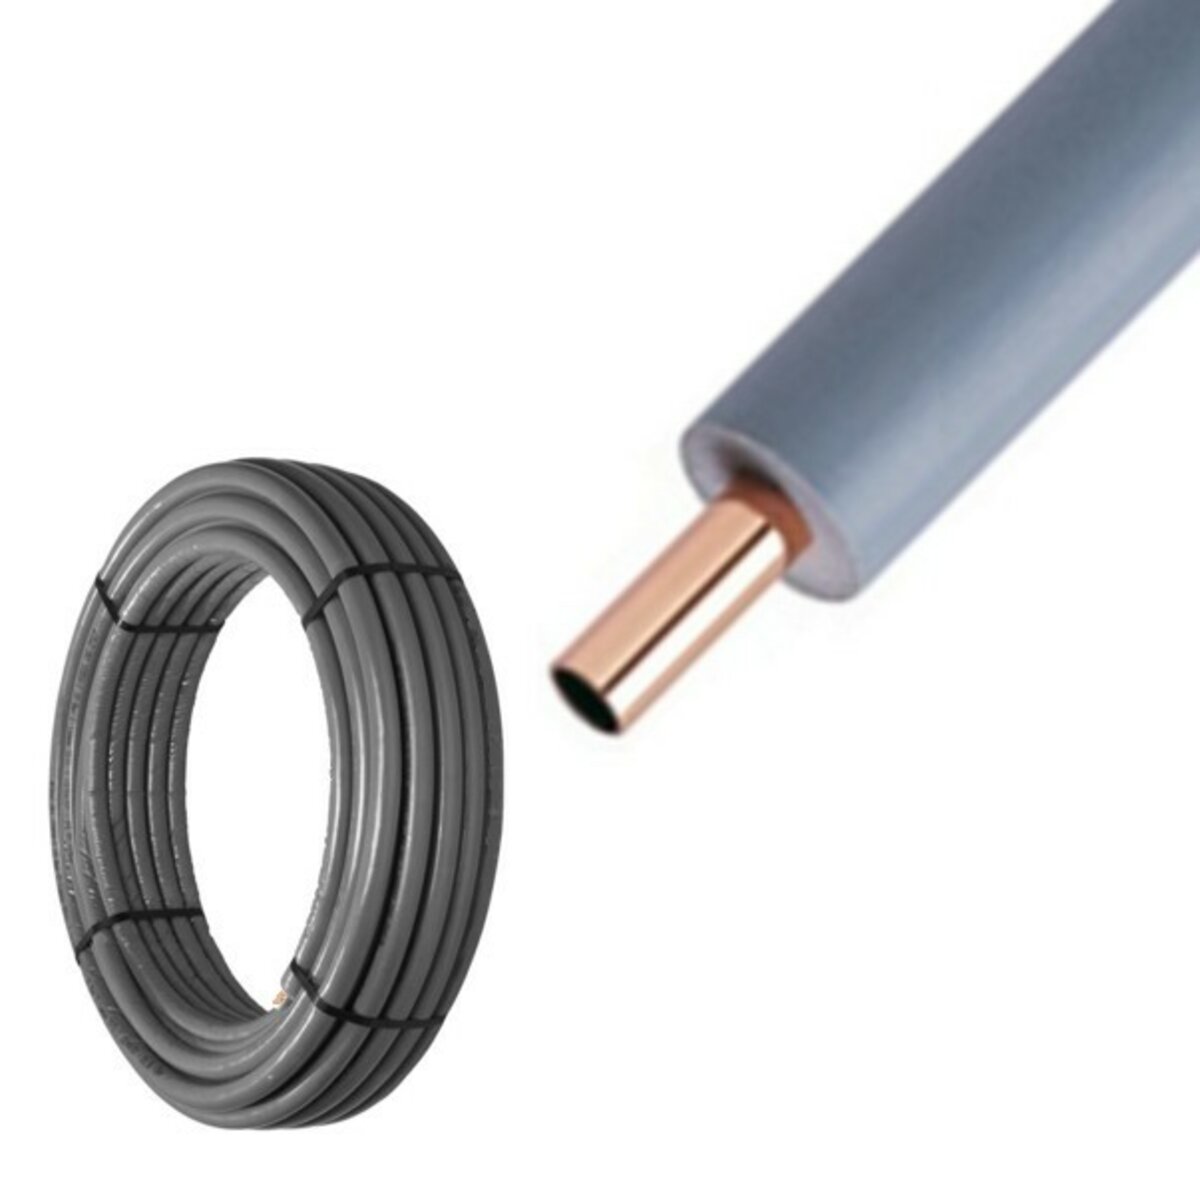 Copper pipe for air conditioning 1/4" (6.35 mm.) Kme